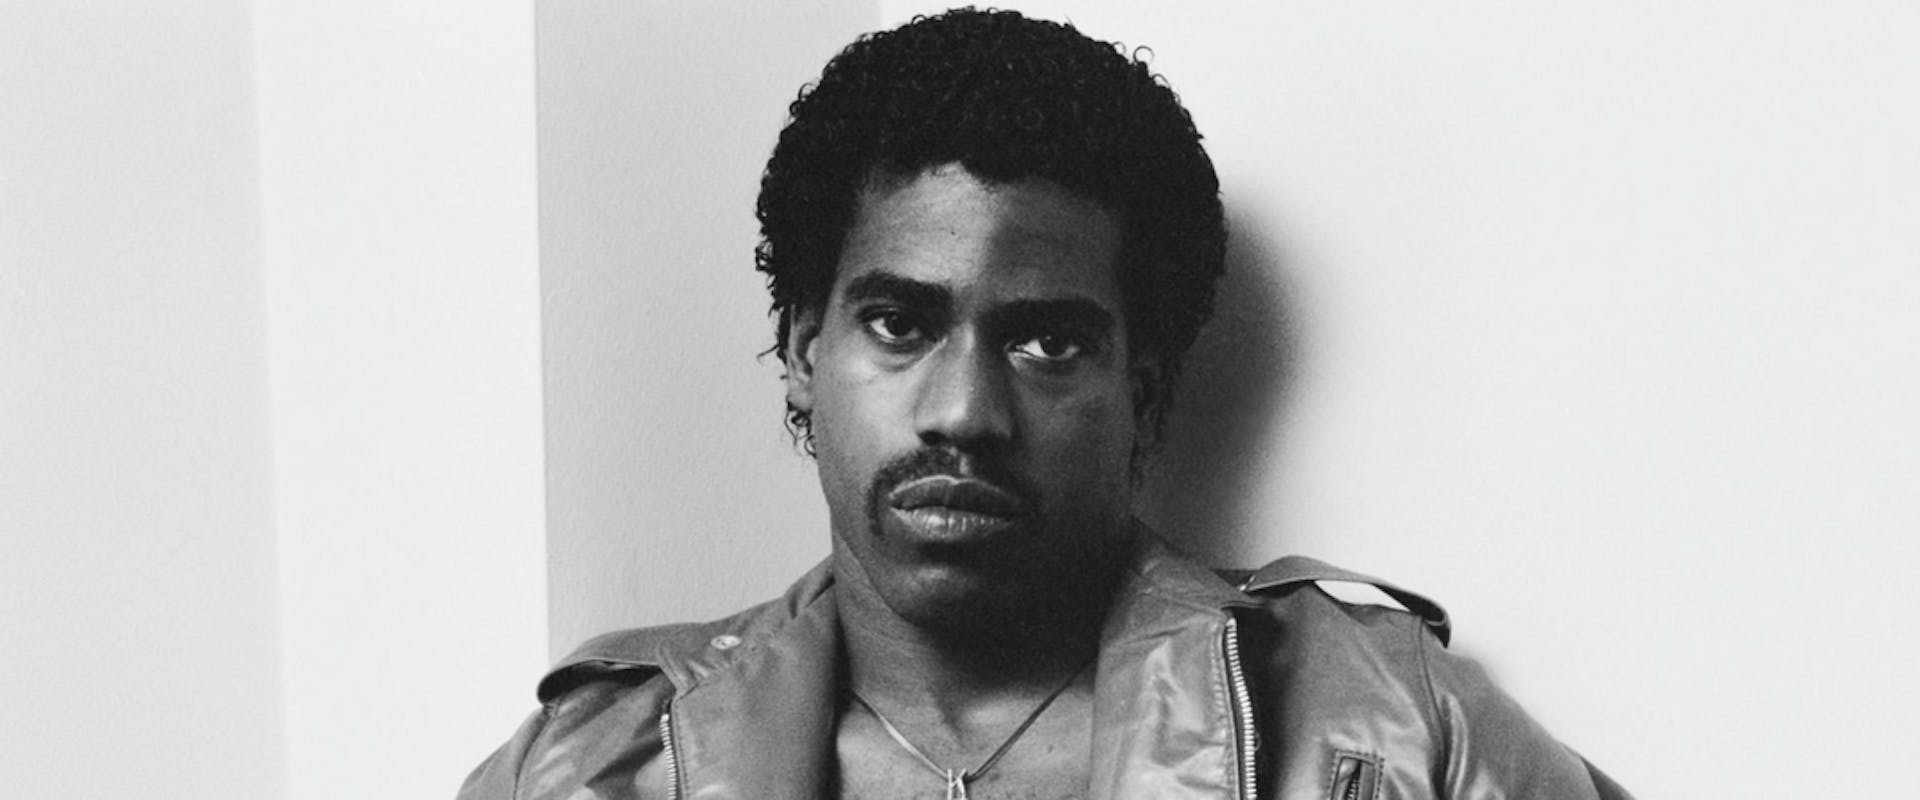 American rapper, singer and songwriter Kurtis Blow wearing a leather jacket over his shirtless torso, a 'KBlow' pendant hanging from his neck, in a studio portrait, location unspecified, circa 1980. 